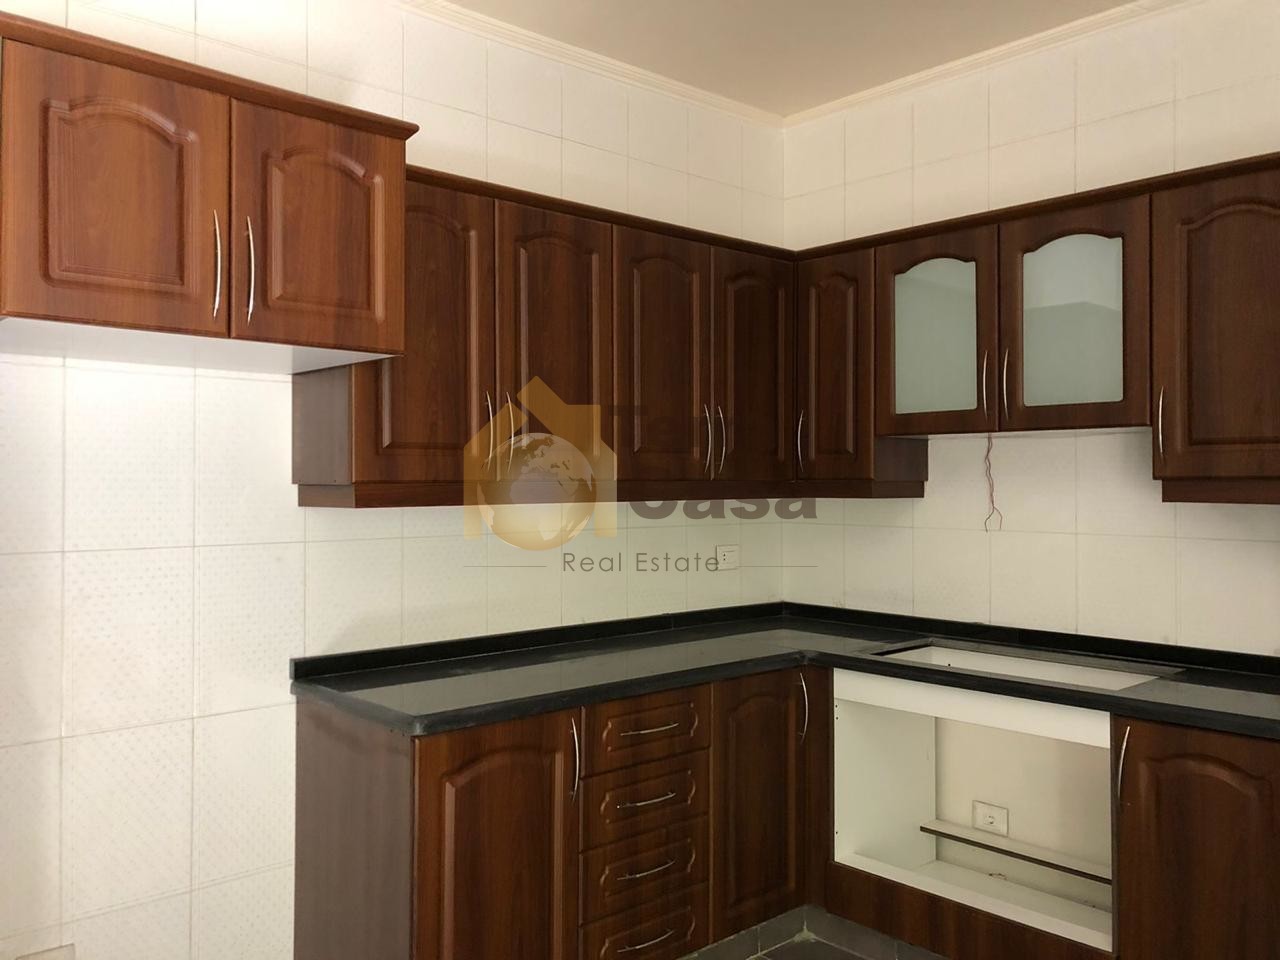 Klayaat brand new apartment with 50 sqm terrace .